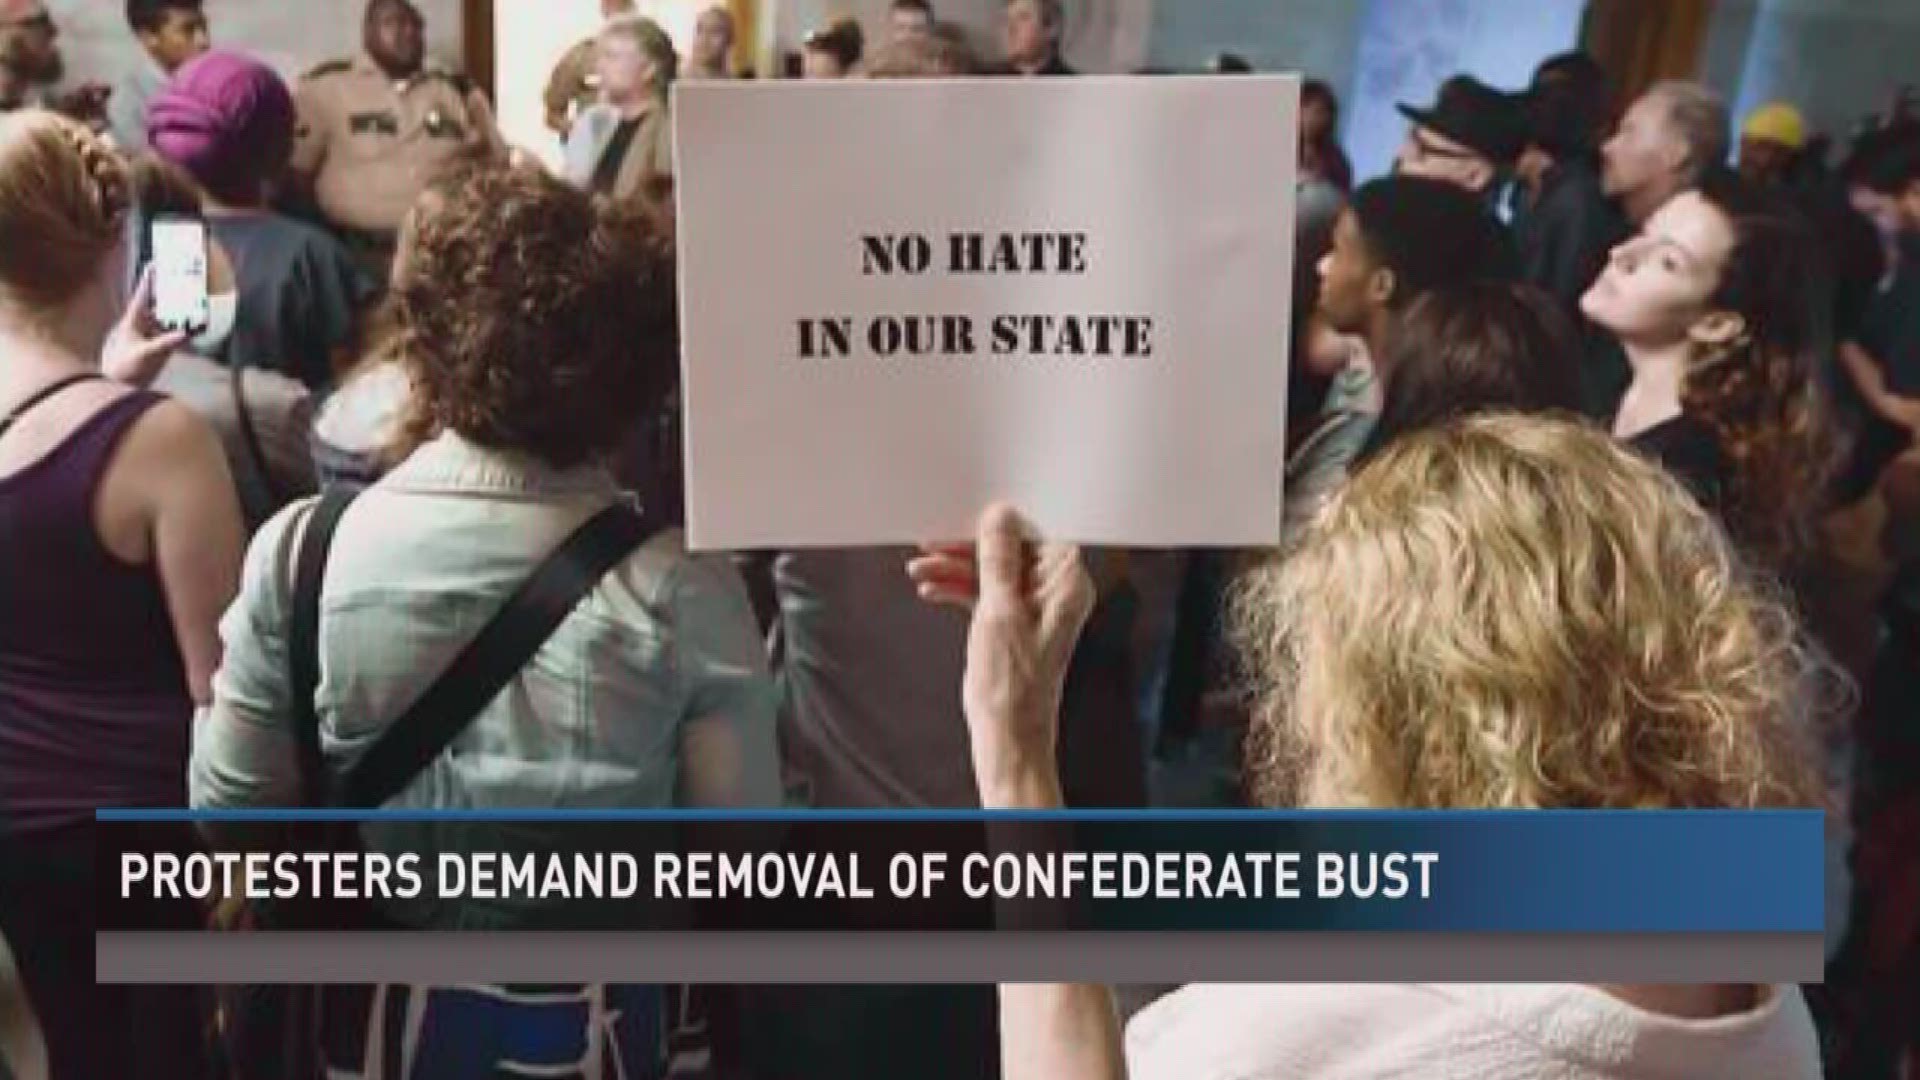 Aug. 14, 2017: Protesters gathered in Nashville to show their objection to a statue of Confederate Gen. Nathan Bedford Forrest in the State Capitol.